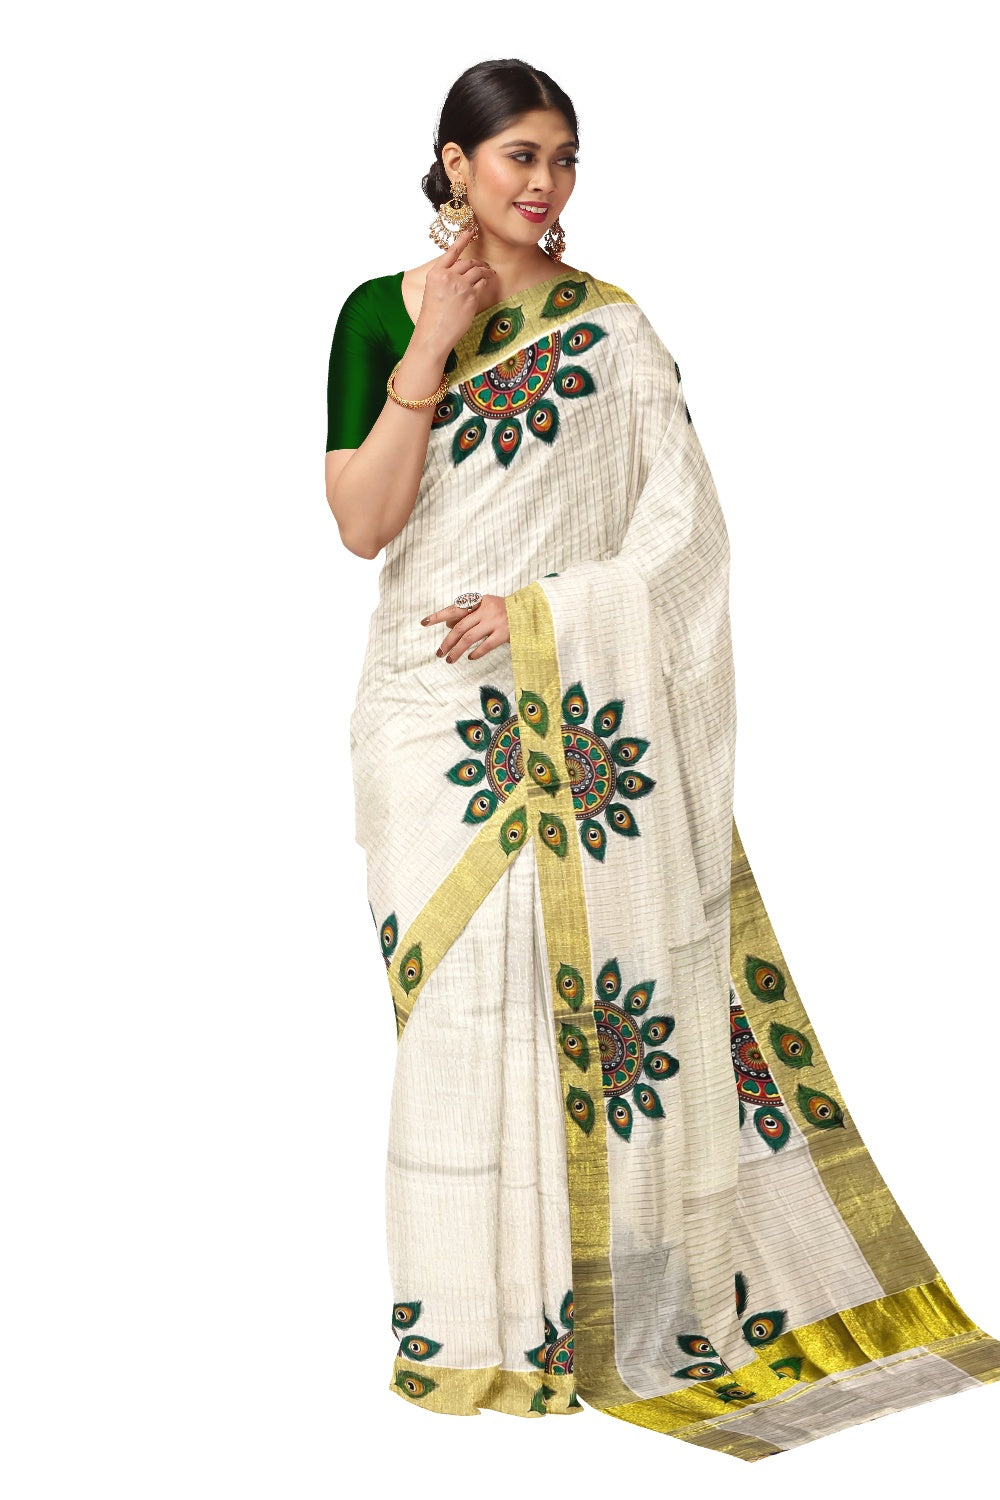 Pure Cotton Kerala Kasavu Lines Saree with Semi Circle Feather Mural Prints and Tassels Work